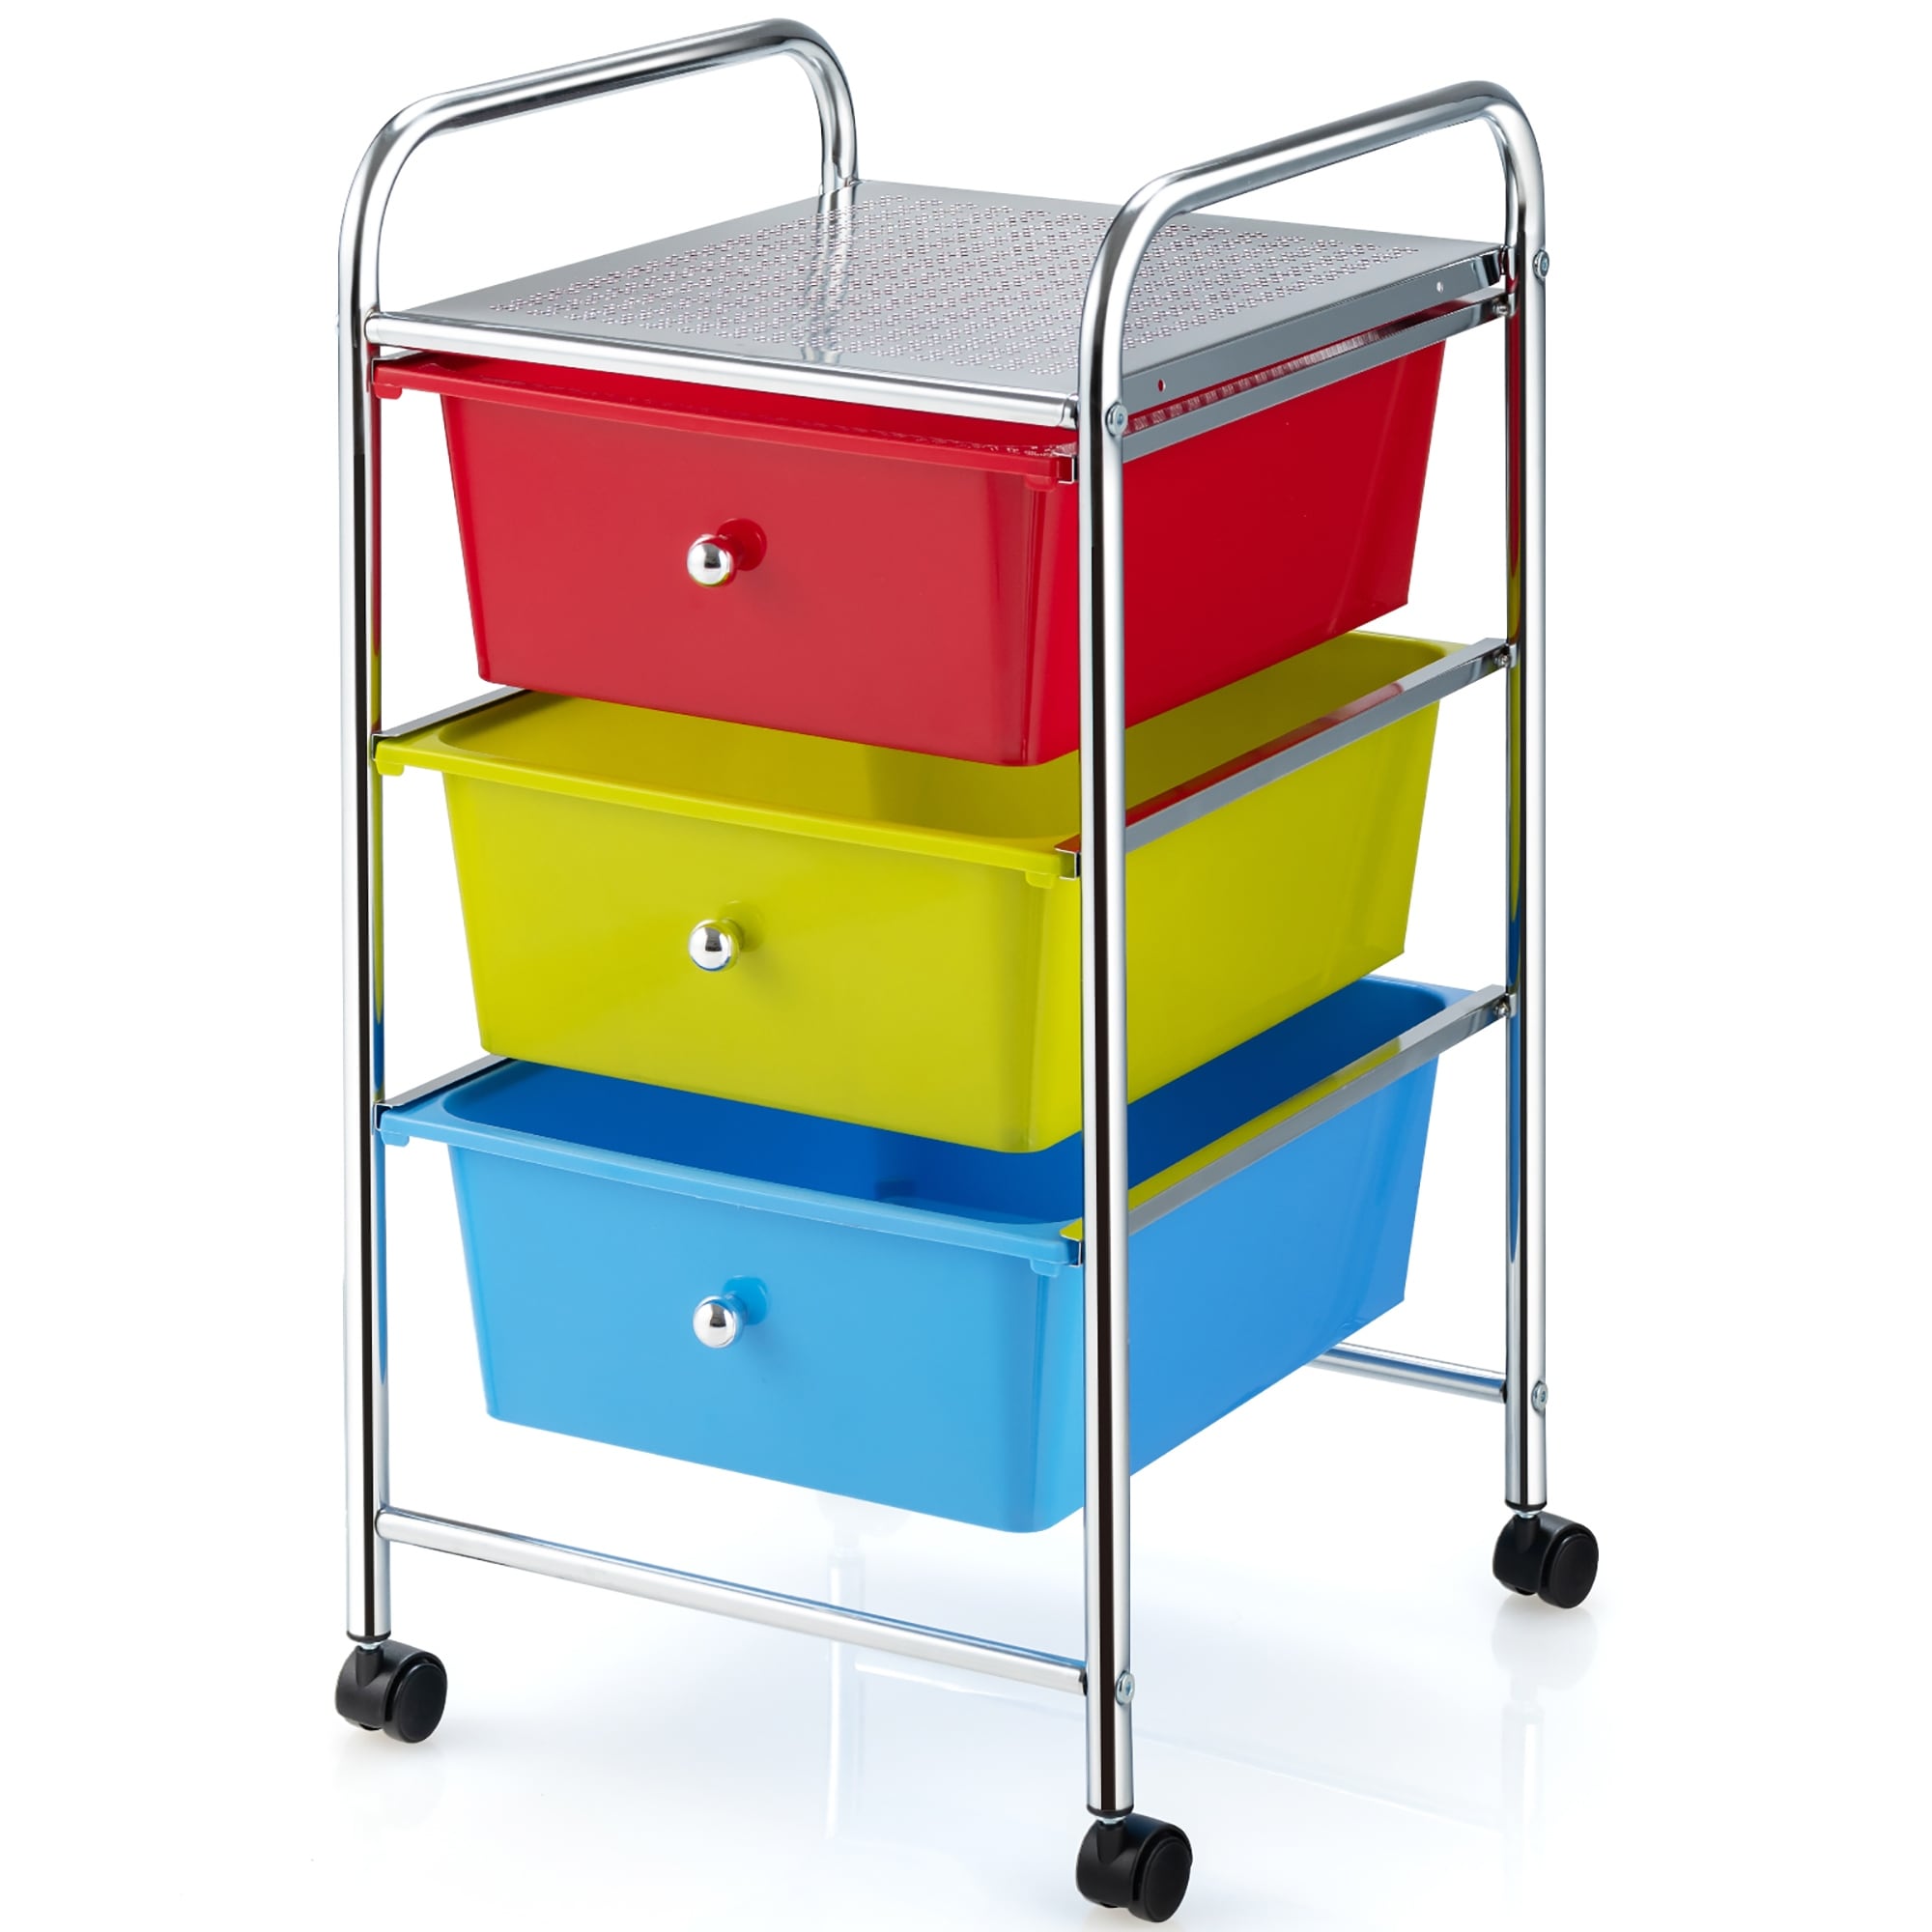 https://ak1.ostkcdn.com/images/products/is/images/direct/c0c28d994fe52e31952a12bdc8af6d10ee74d28d/3-Drawer-Cart-Storage-Bin-Organizer-Rolling-w-Plastic-Drawers-Yellow%5C.jpg